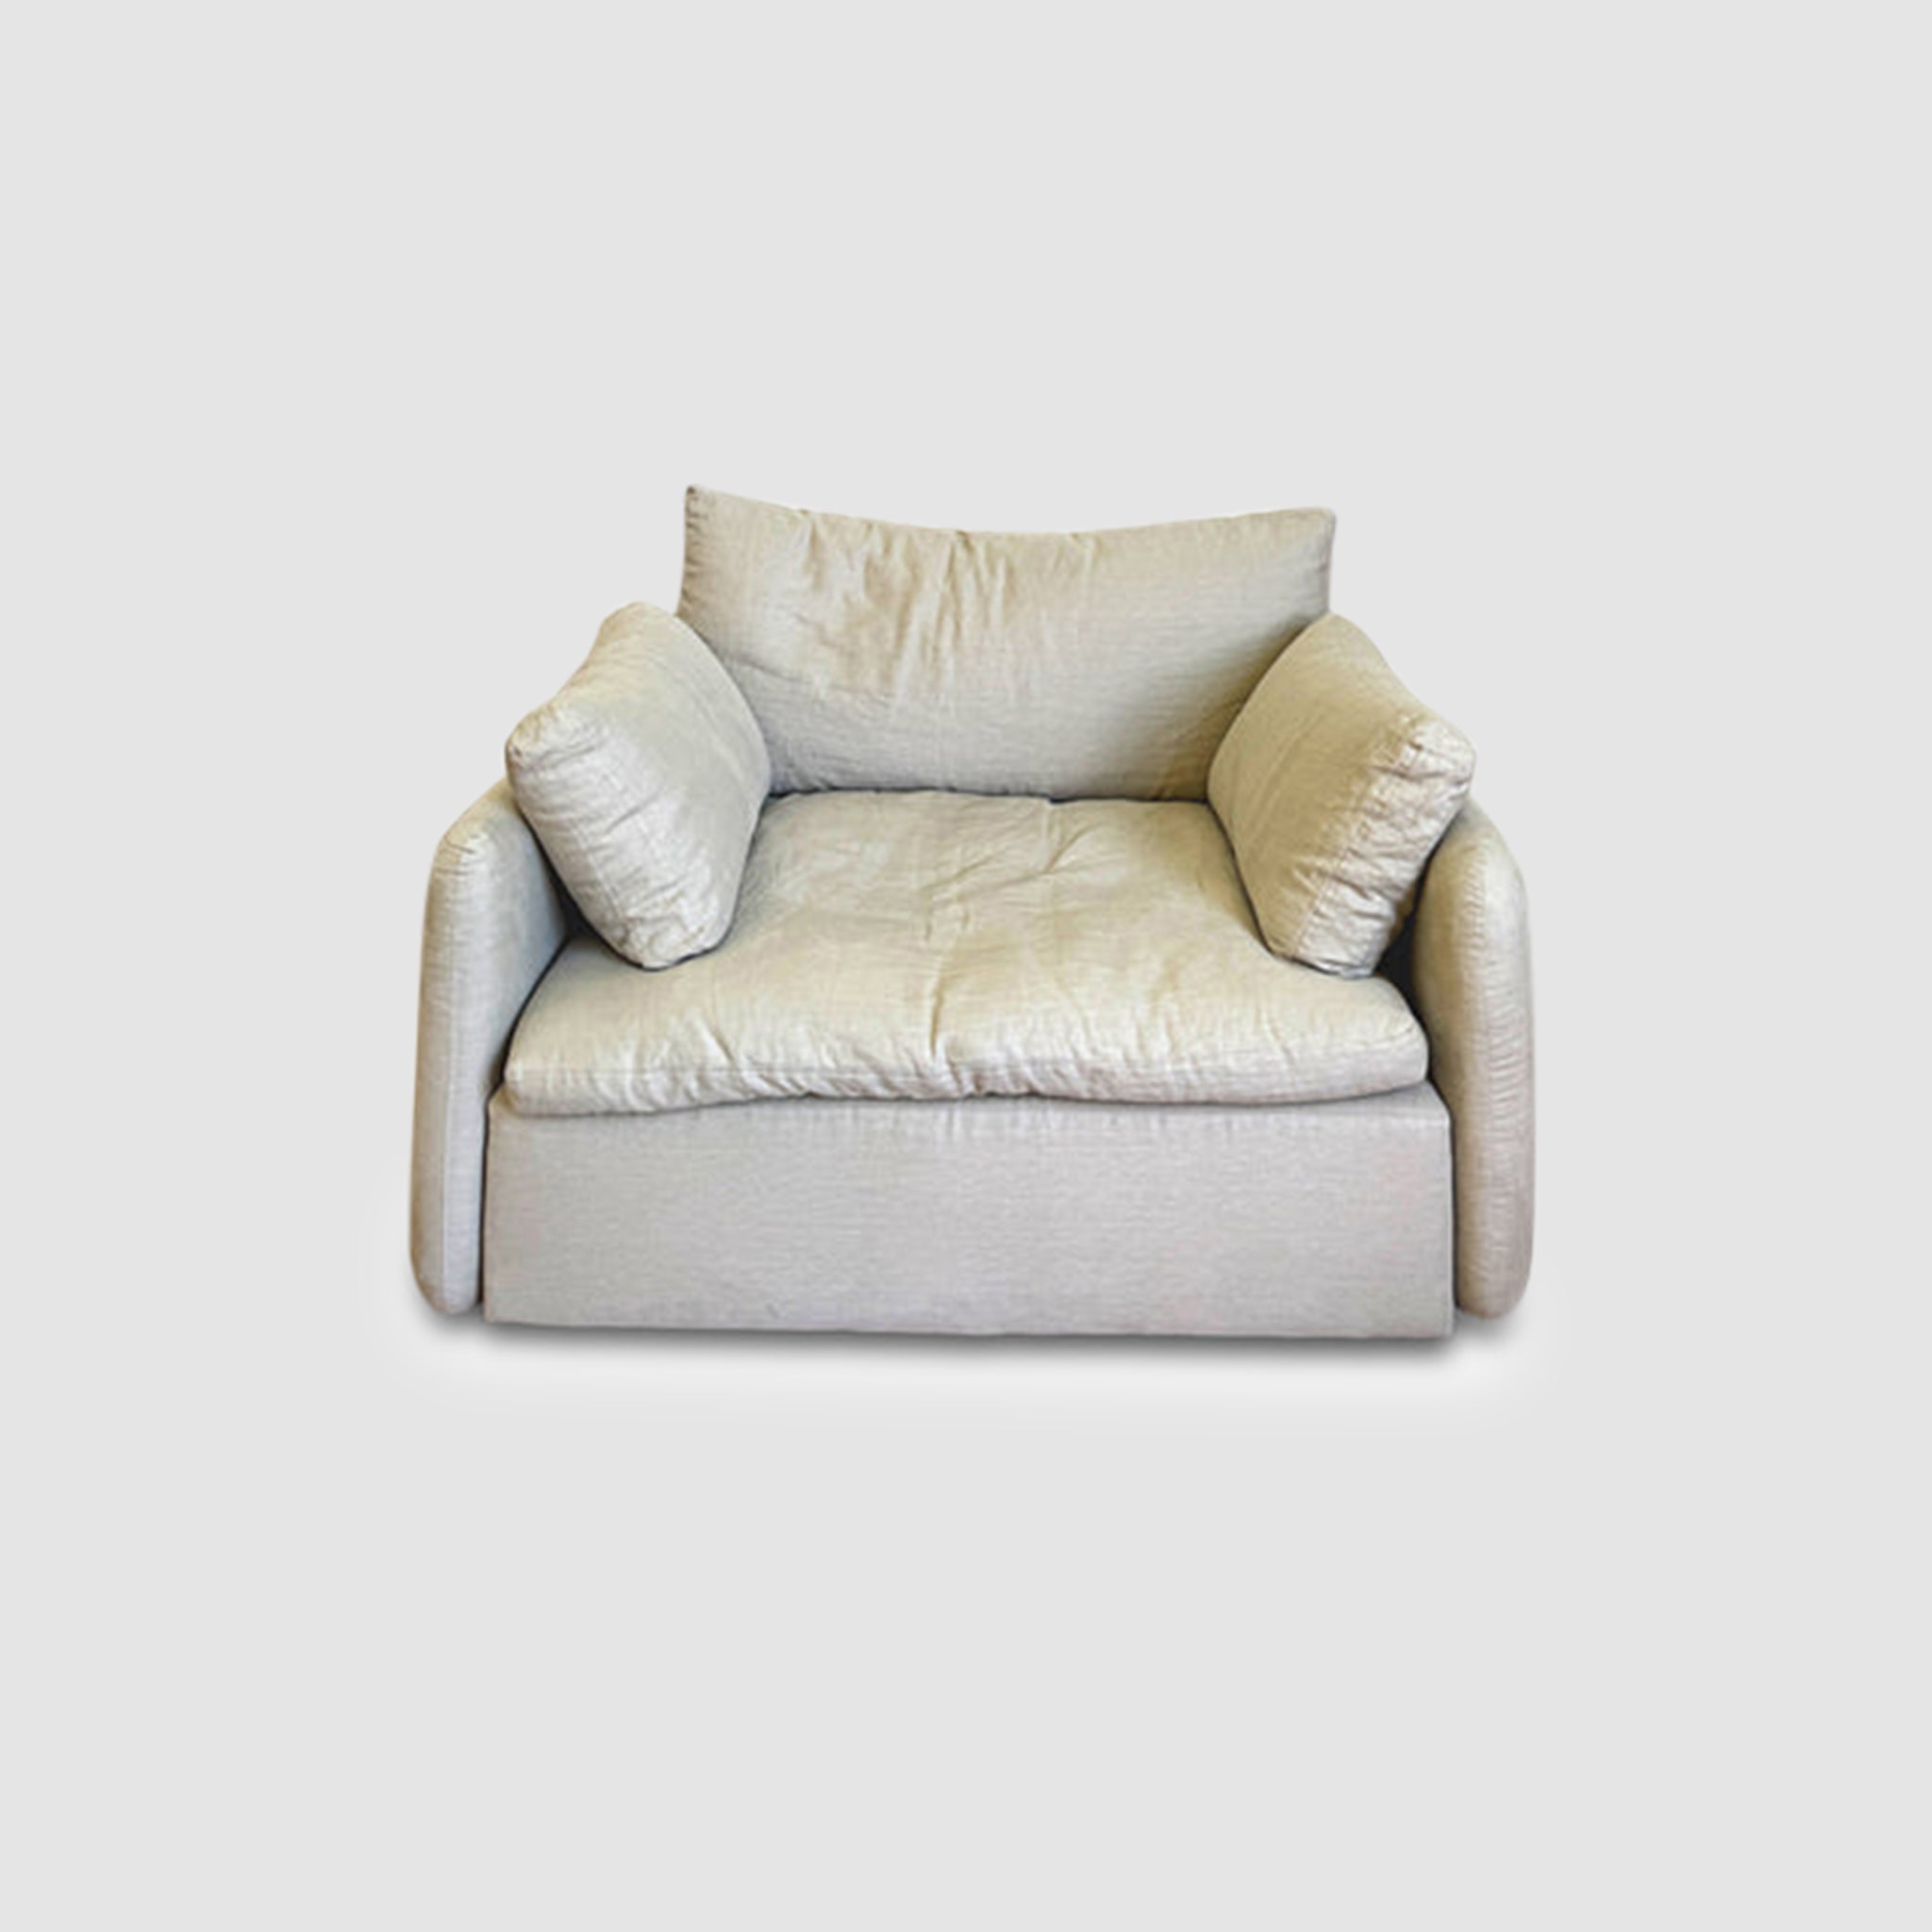 White one-and-a-half-seater couch with removable covers in a modern living room. The couch has a solid wood frame and plush cushions. This comfortable couch is perfect for relaxing or reading.